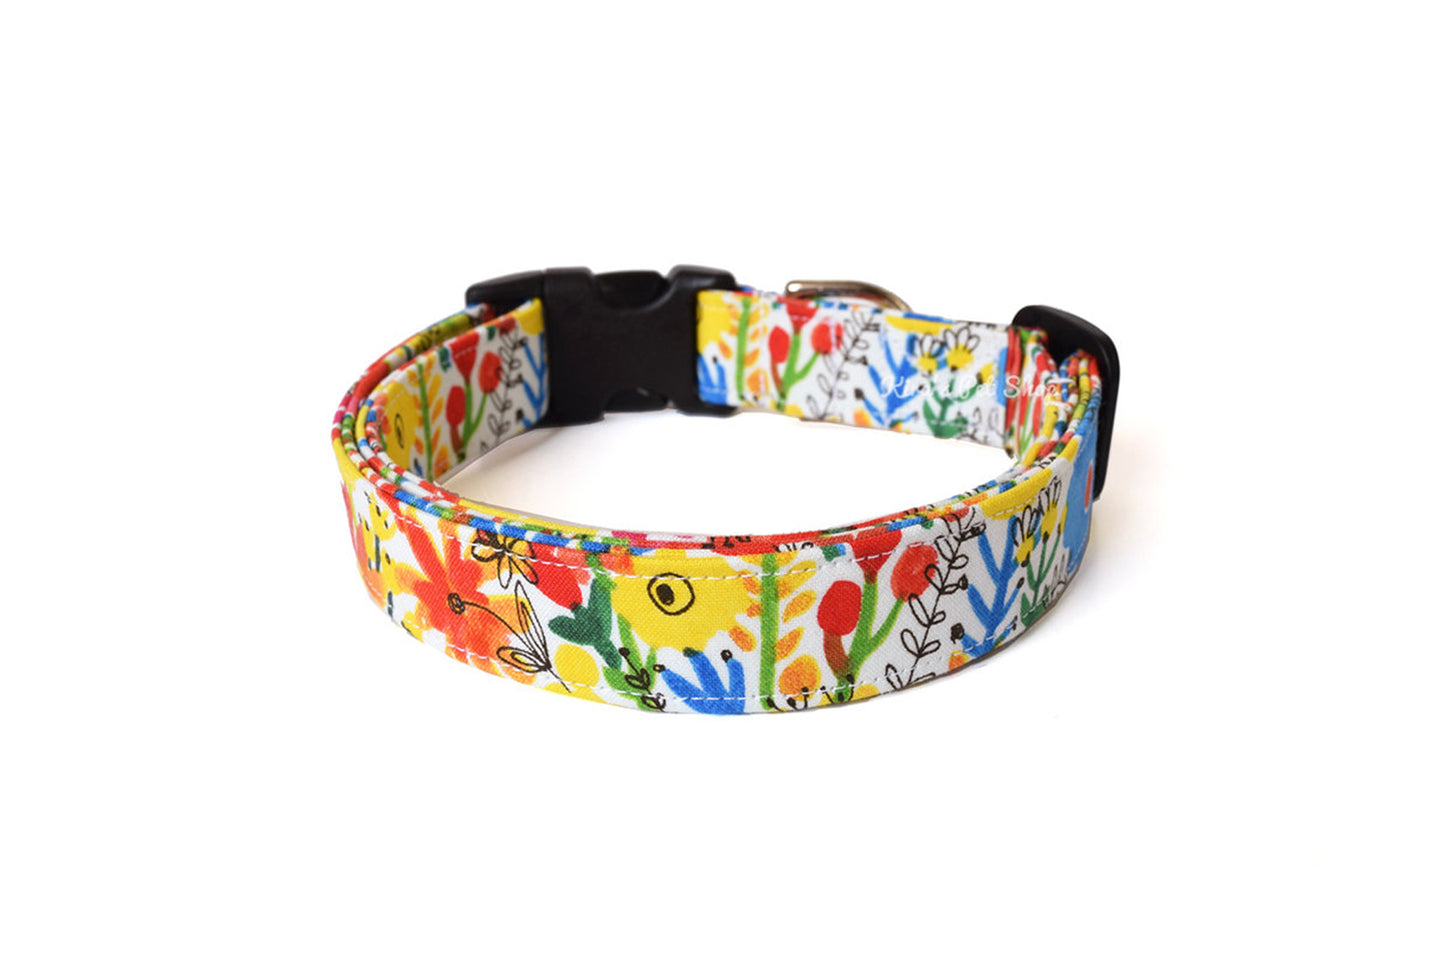 Multicolor Painted Floral Dog Collar - Handmade by Kira's Pet Shop